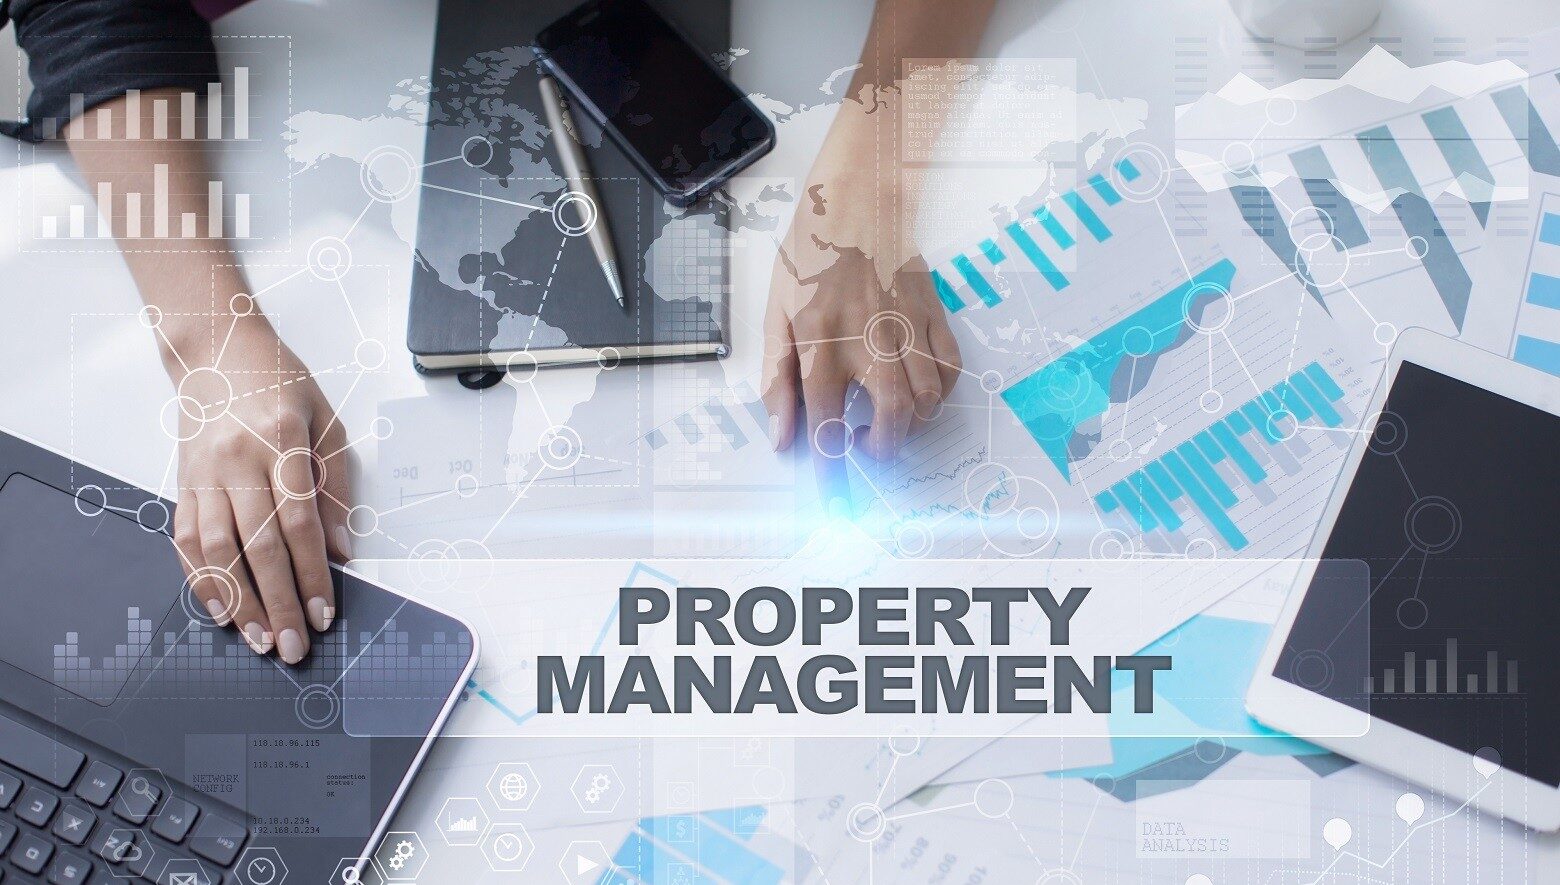 Woman working with documents, Tablet pc and notebook. Property management Concept.